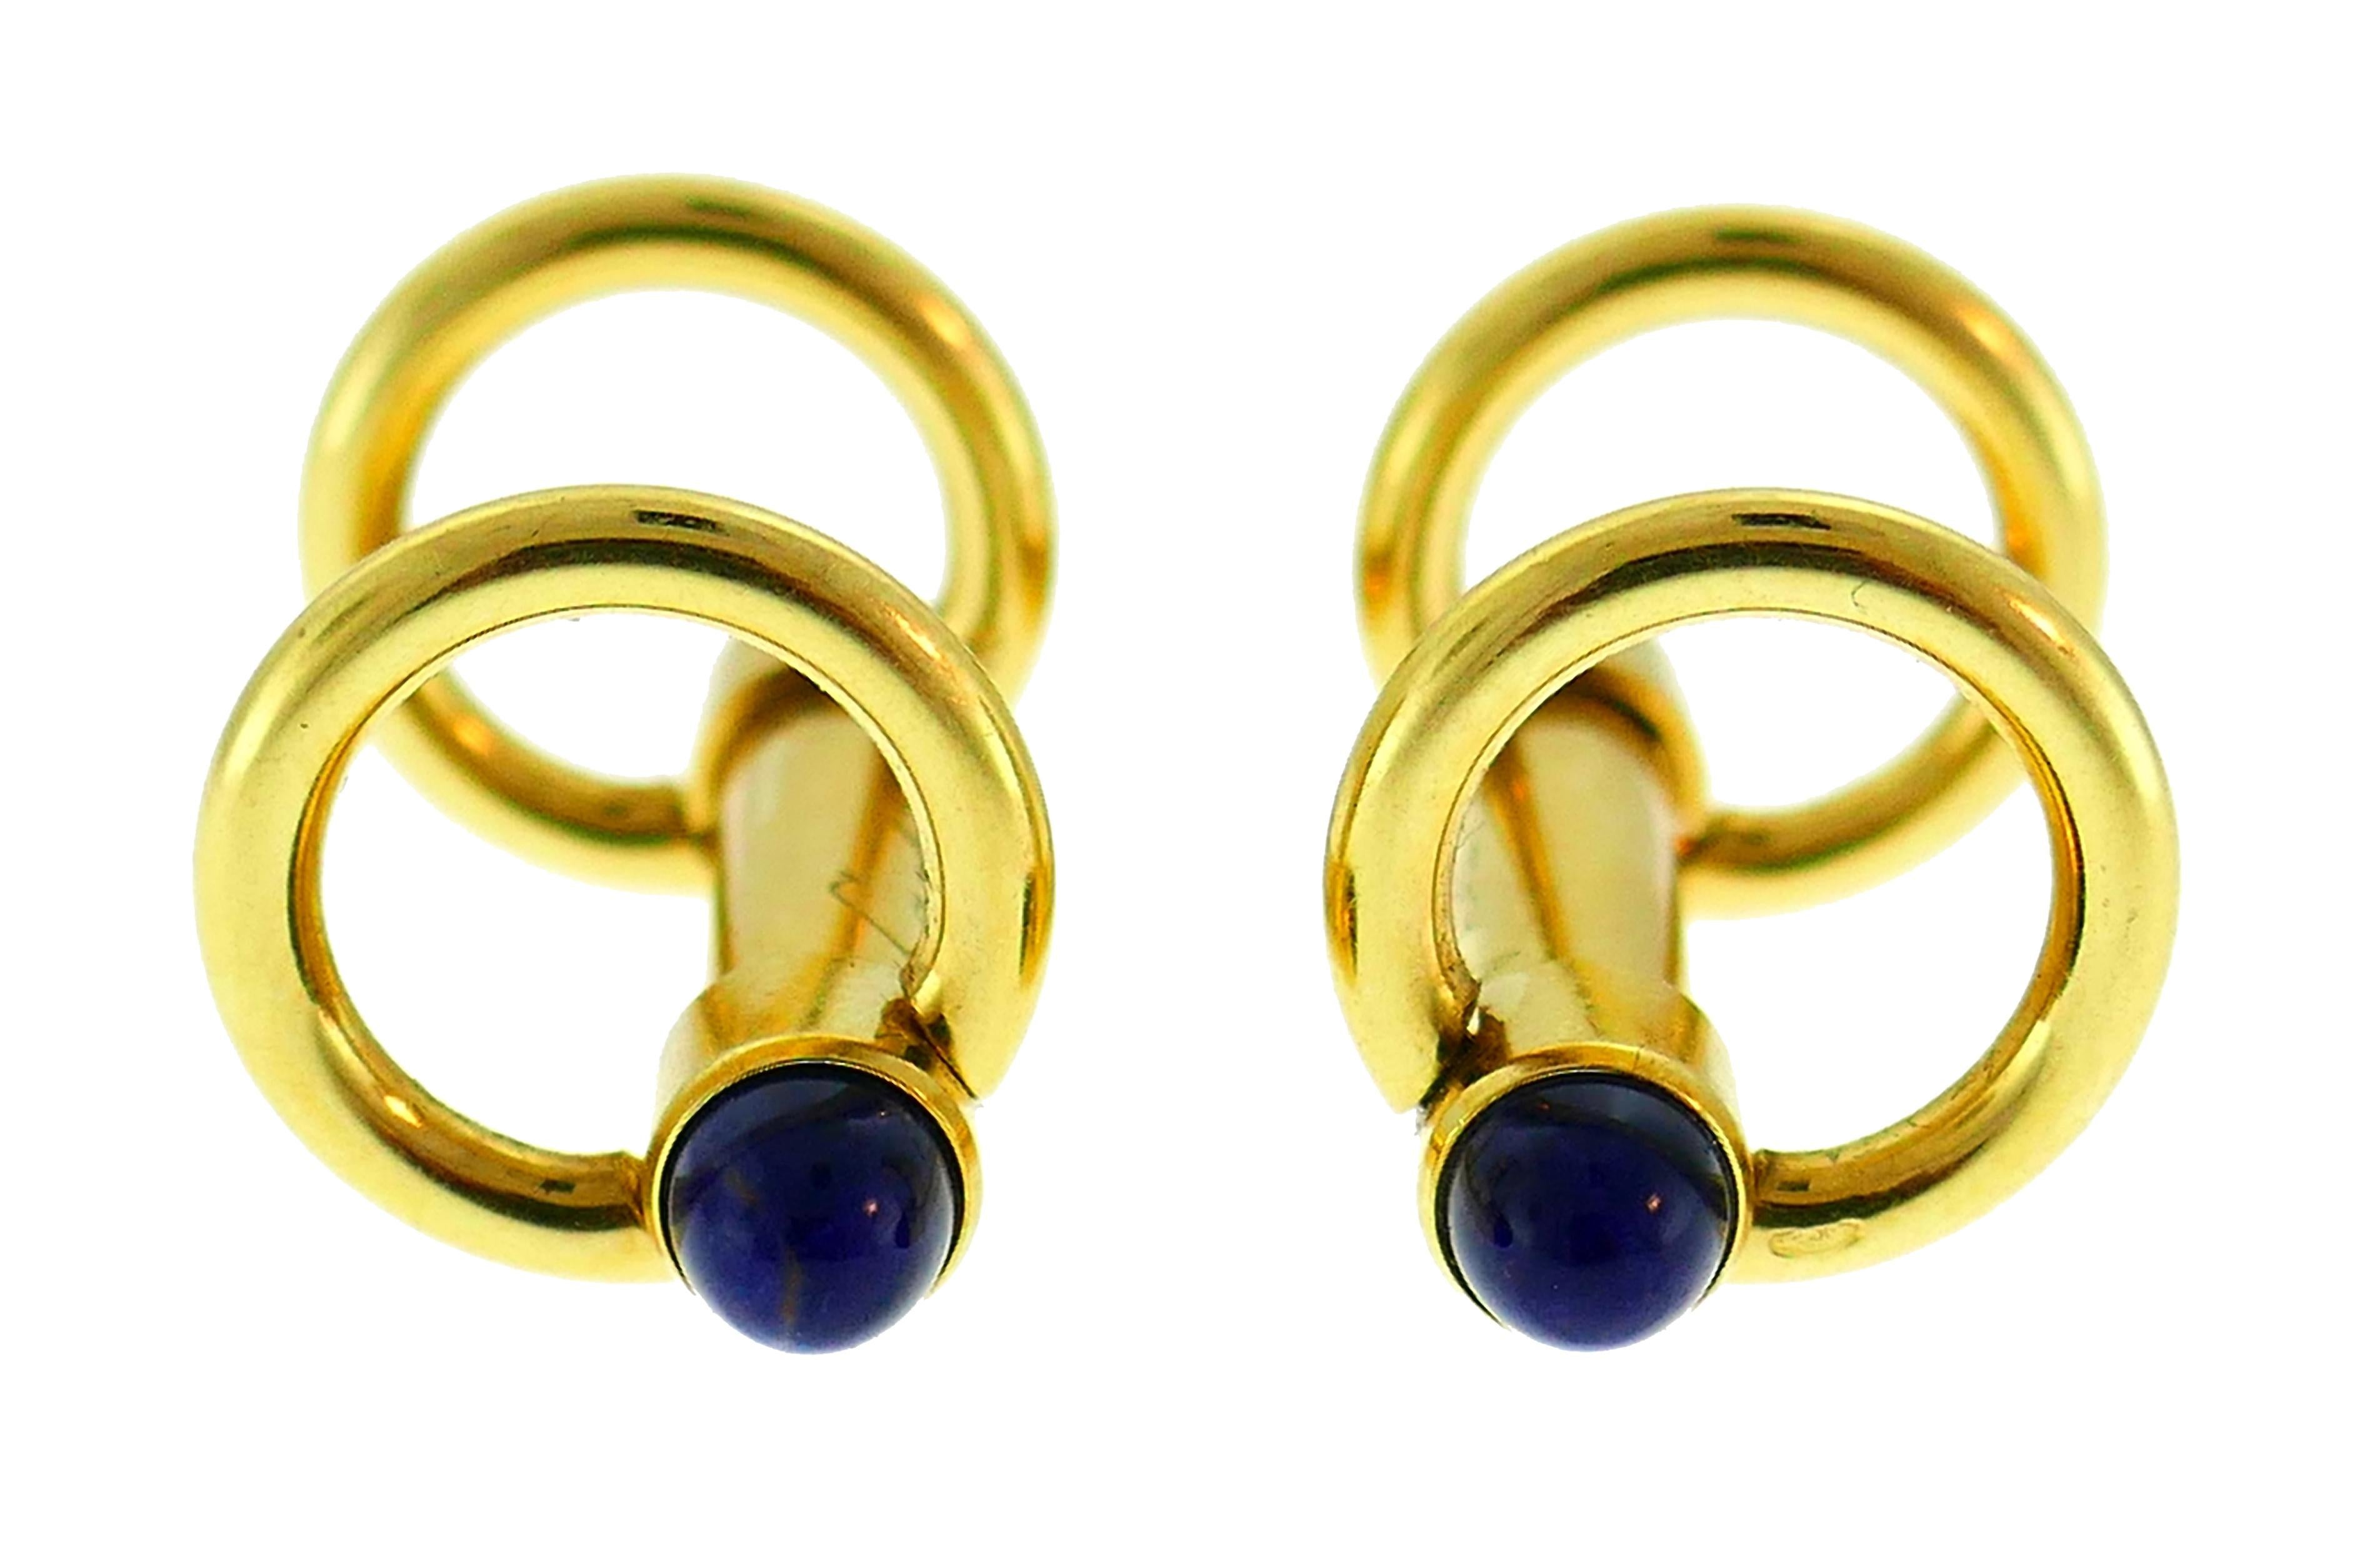 Classy cufflinks created by Cartier in France. 
Made of 18 karat (stamped) yellow gold and sapphire cabochons. 
Measurements: 1-1/2 x 1/2 inch (3.7 x 1.3 cm), the bars 1 x 1/8 inch (1.6 x 0.4 cm). 
Weight 11.5 grams.
Stamped with Cartier maker's